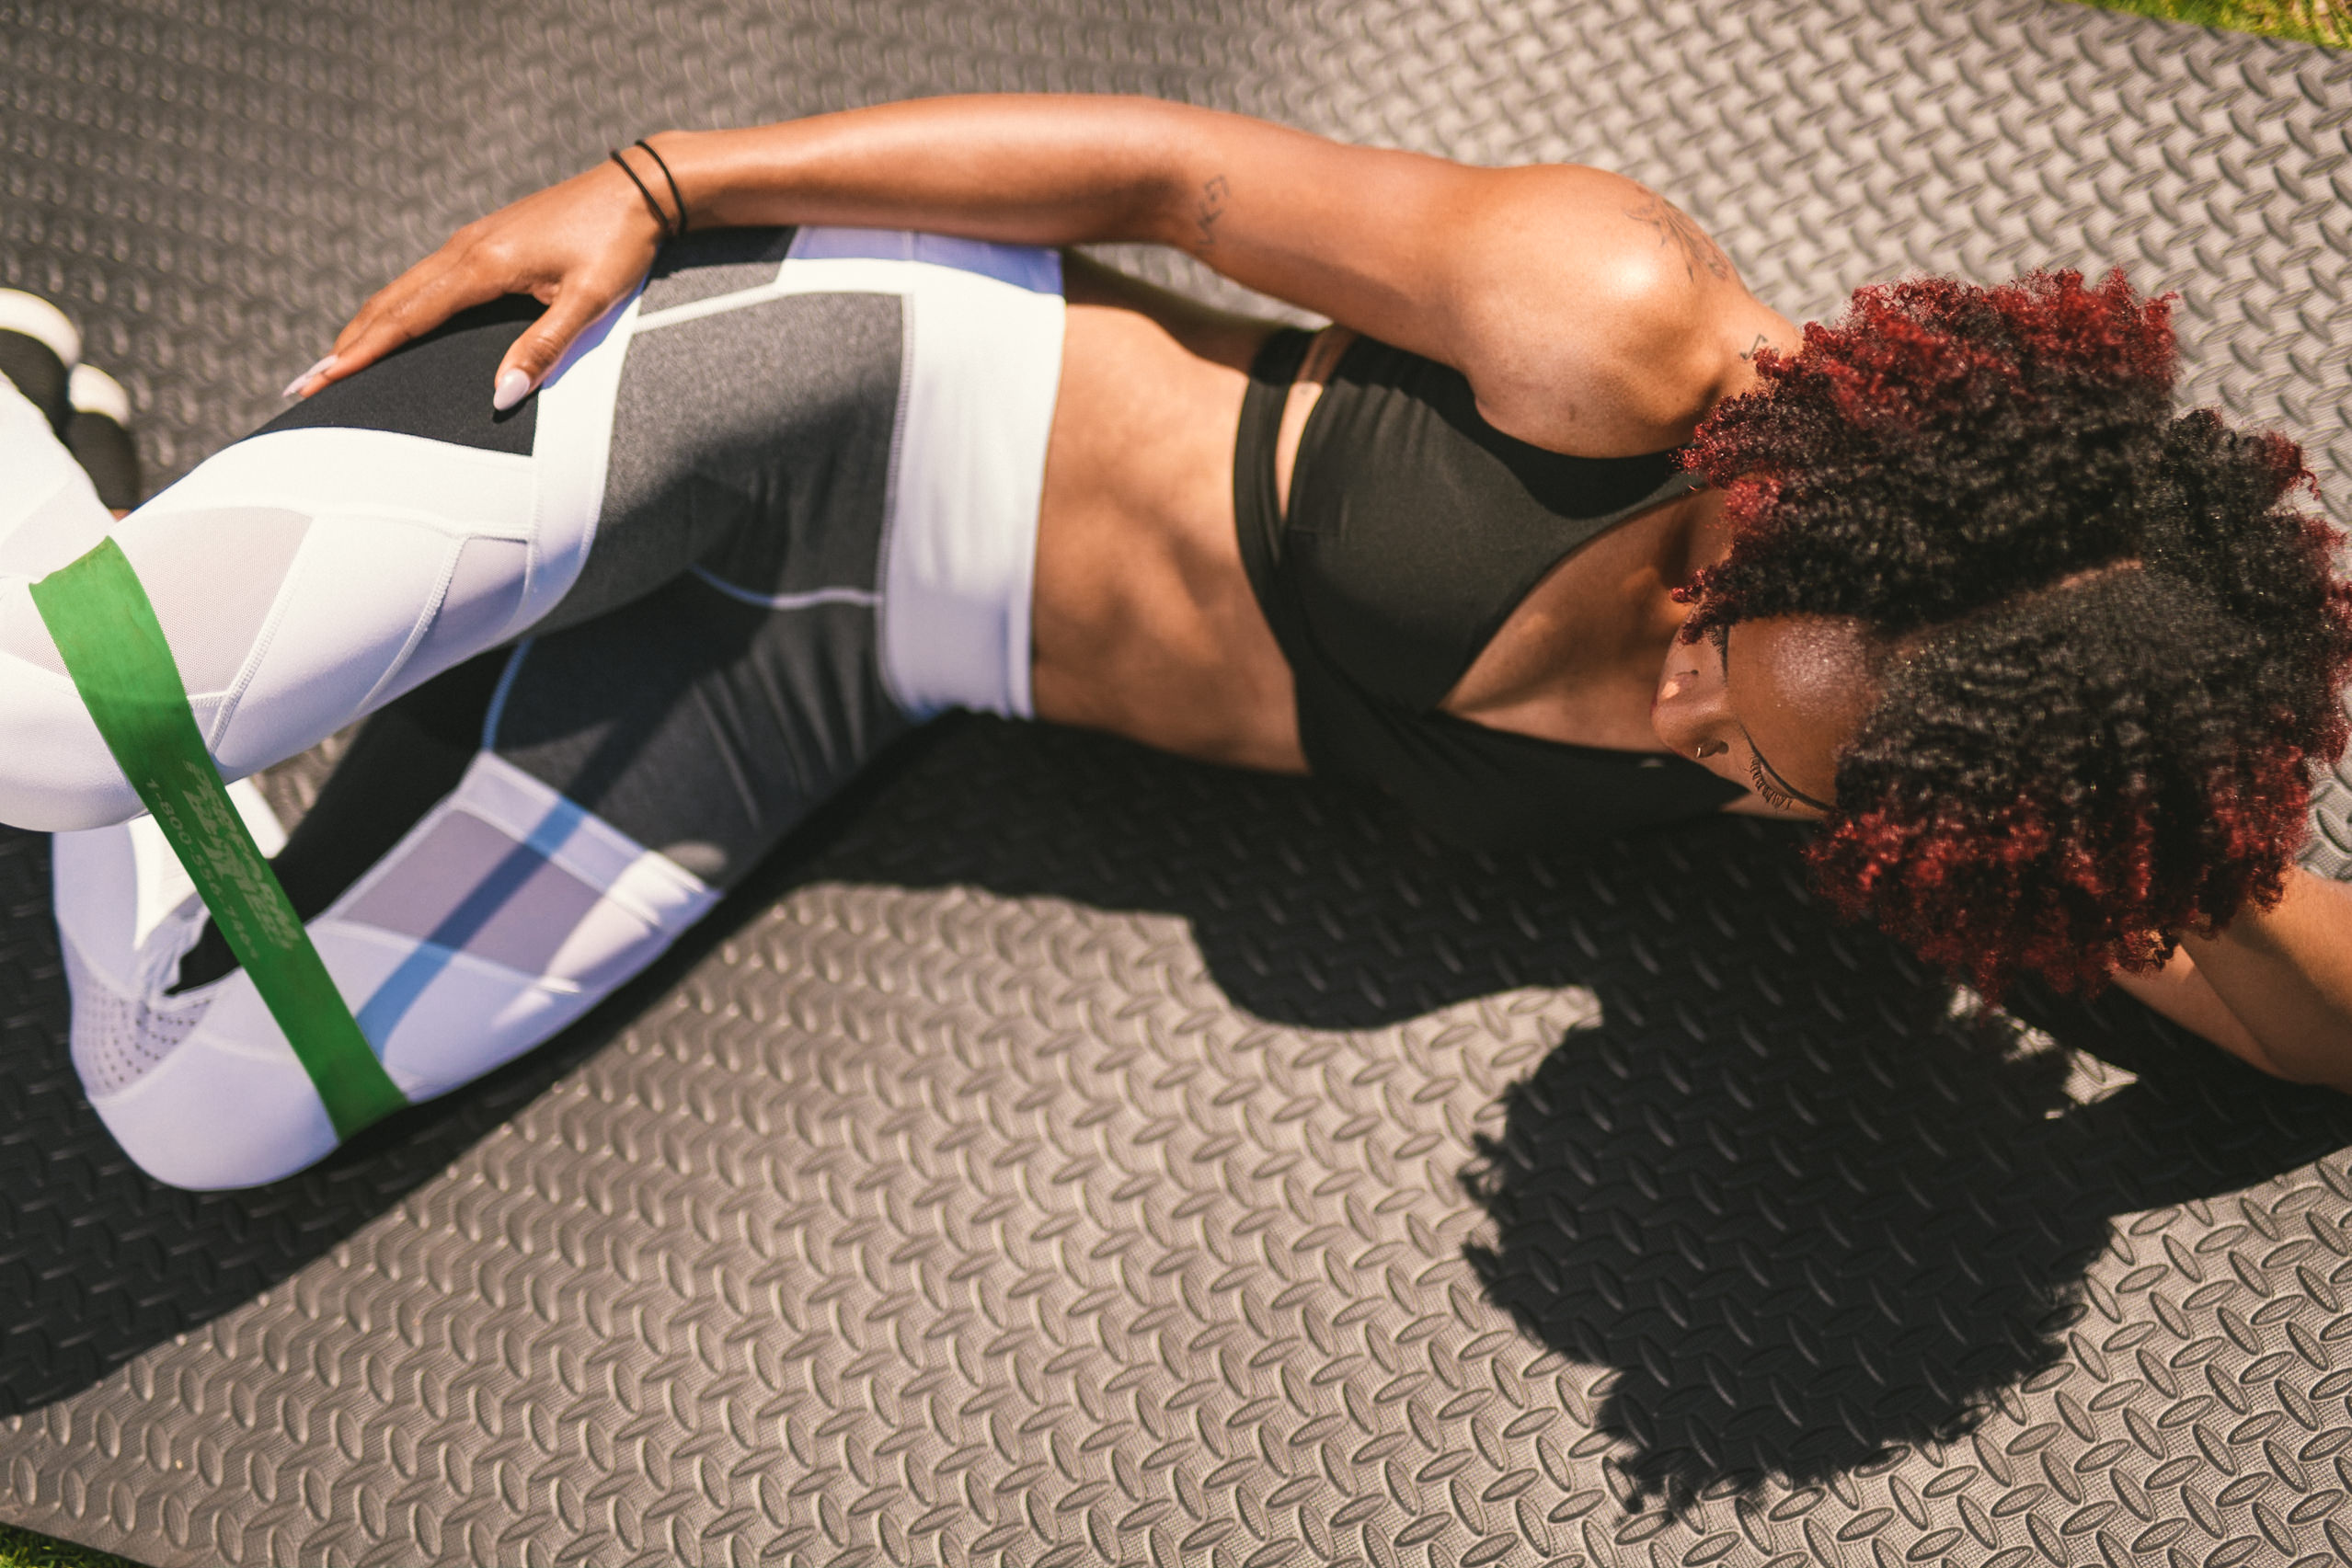 Professional Photography Services to elevate your brand C&I Studios Creative Marketing Kinetix 365 View from above of woman doing stretches with rubber band in track outfit